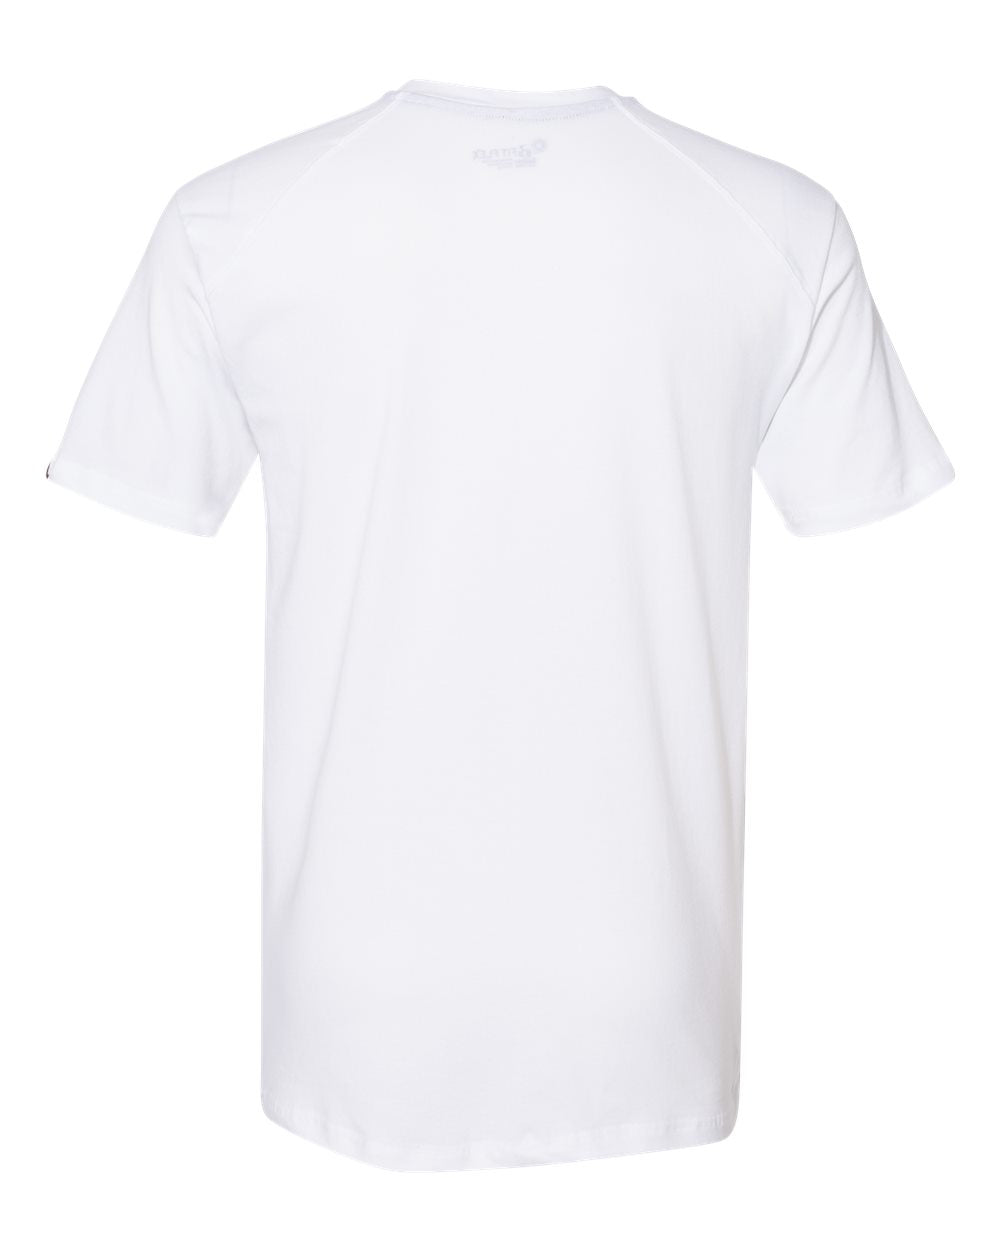 Southern Boone Basketball FitFlex Performance T-Shirt - 1000